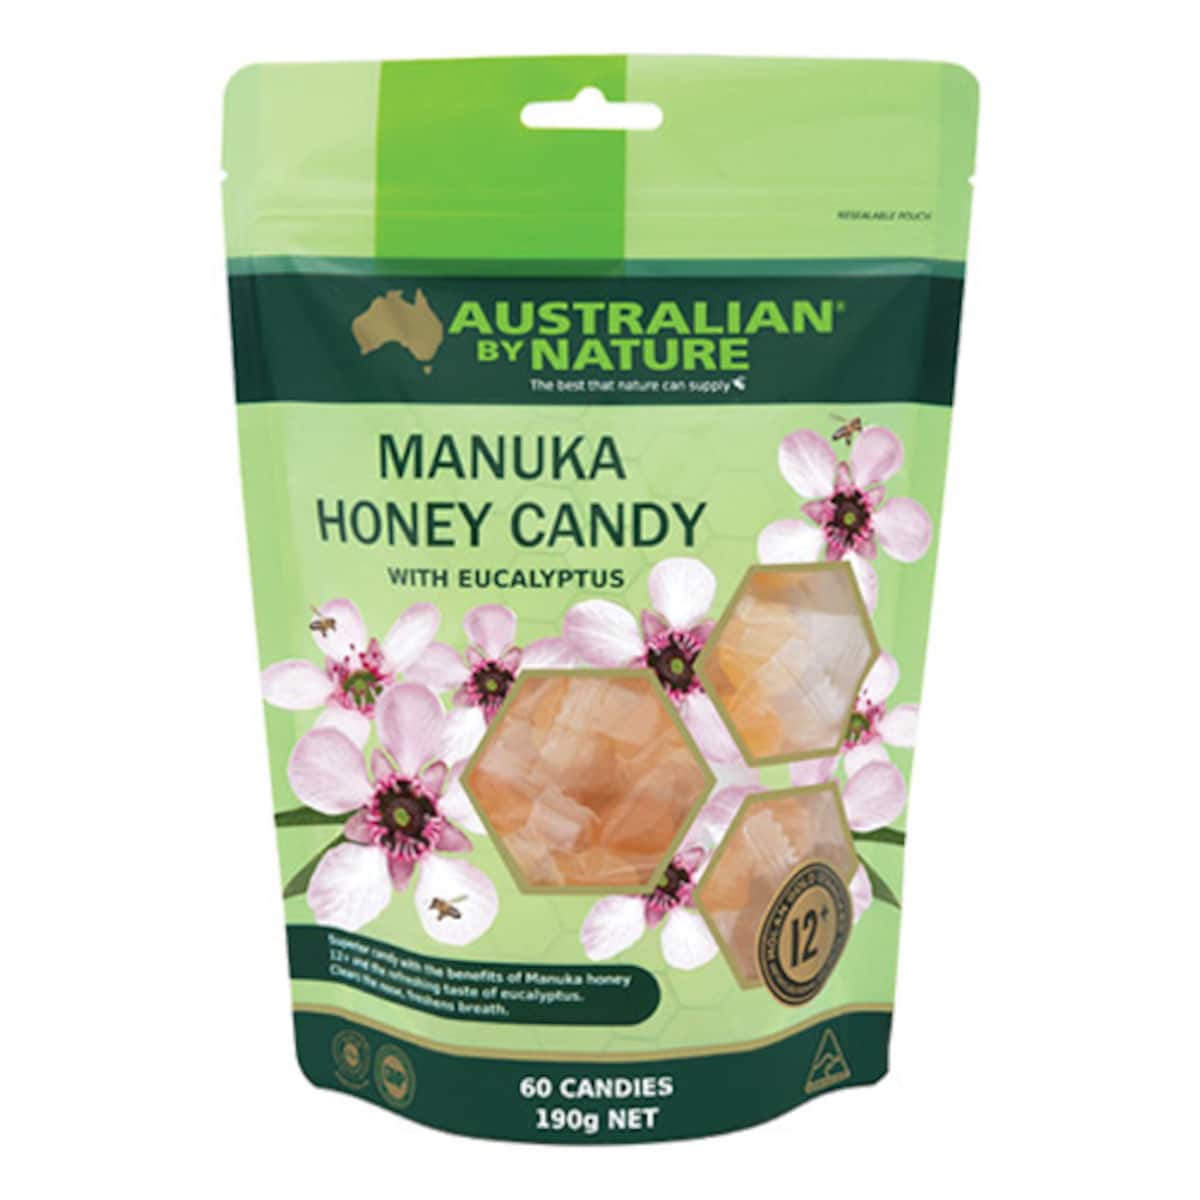 Australian by Nature Manuka Honey Candy with Eucalyptus 60 Candies